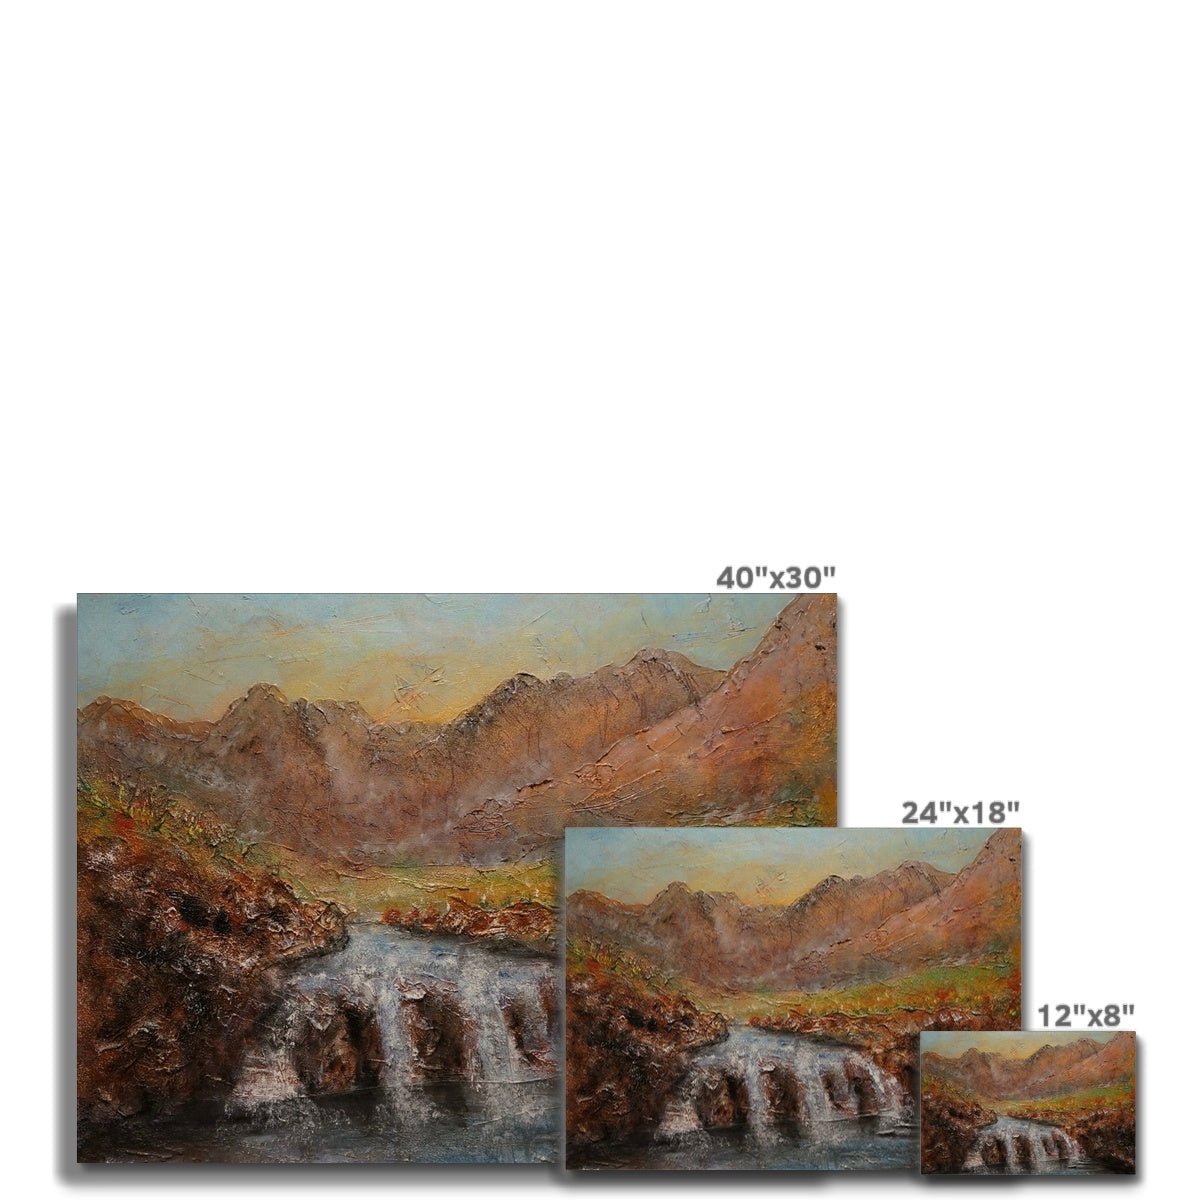 Fairy Pools Dawn Skye Painting | Canvas From Scotland-Contemporary Stretched Canvas Prints-Skye Art Gallery-Paintings, Prints, Homeware, Art Gifts From Scotland By Scottish Artist Kevin Hunter